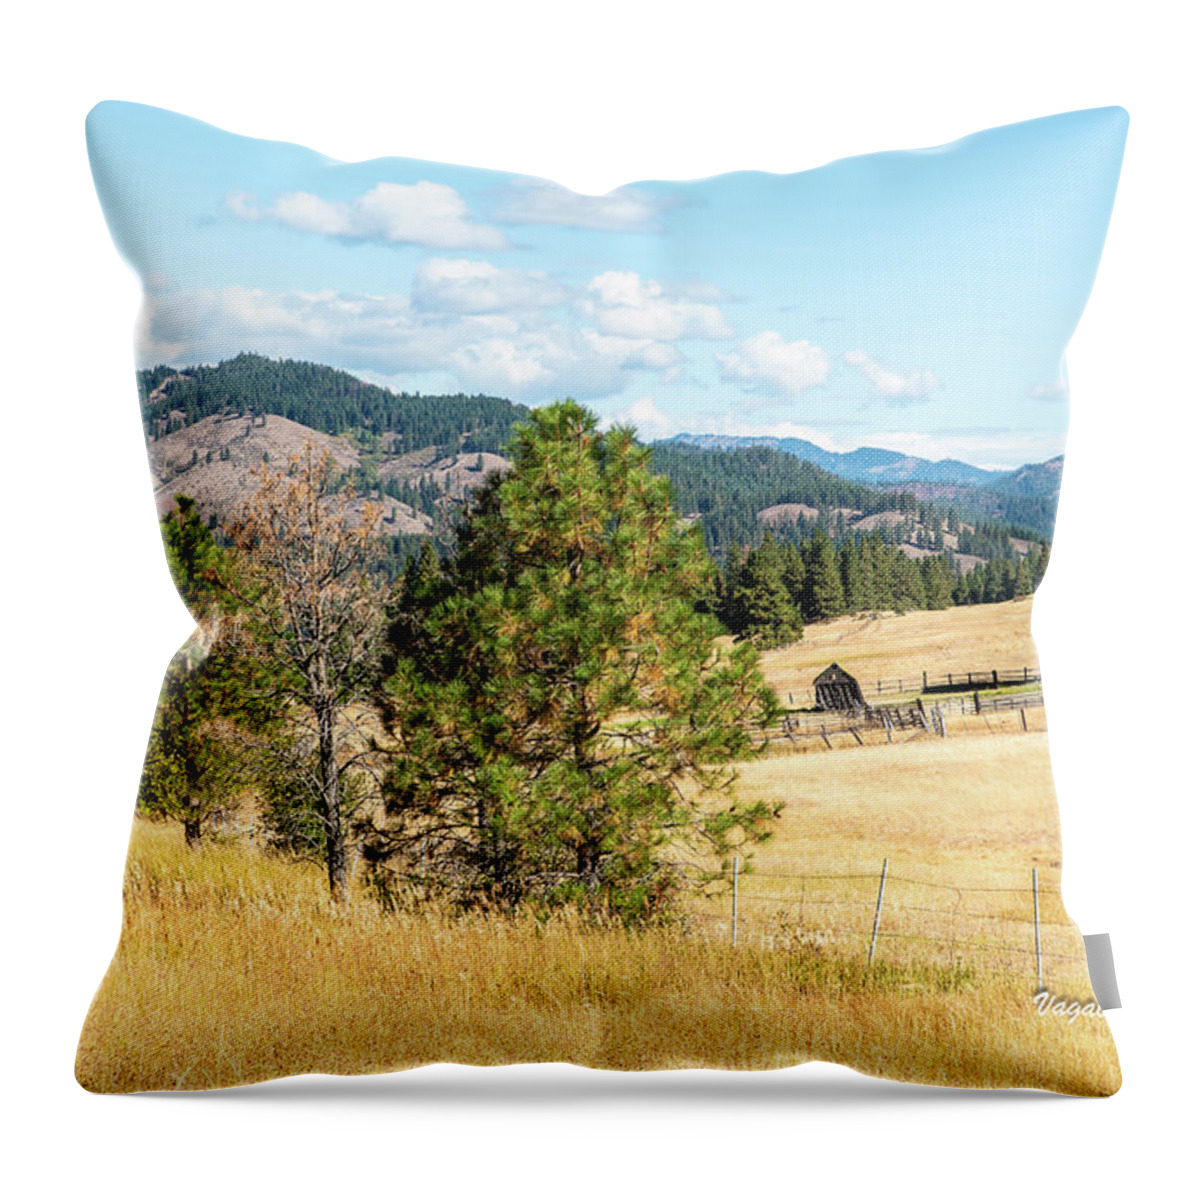 Highway 97 Ranch Memories Throw Pillow featuring the photograph Highway 97 Ranch Memories by Tom Cochran